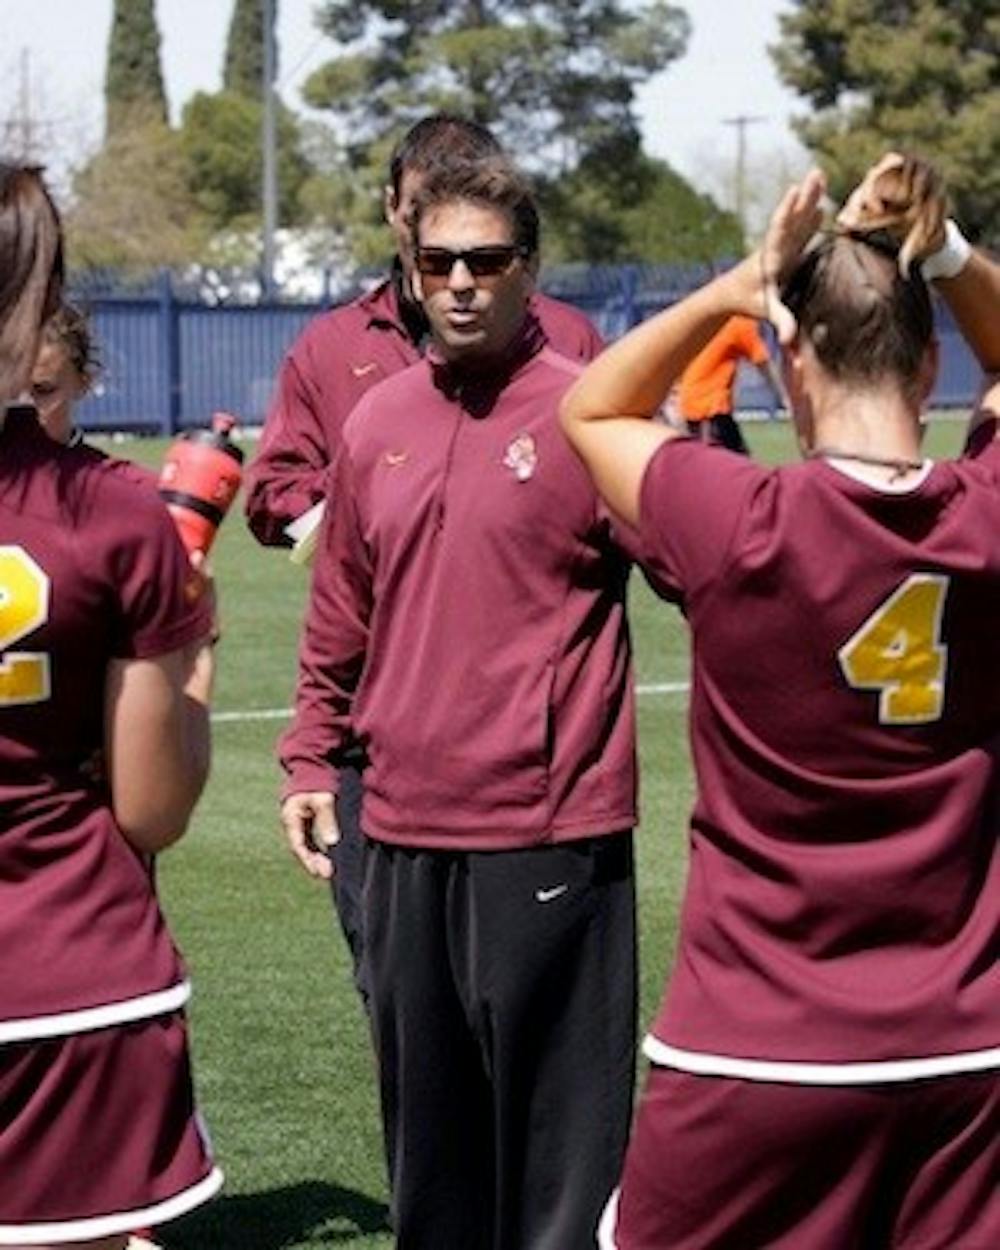 ASU women's soccer coach Kevin Boyd speaks to his team during a spring tournament game in March. (Photo Courtesy of Steve Rodriguez)